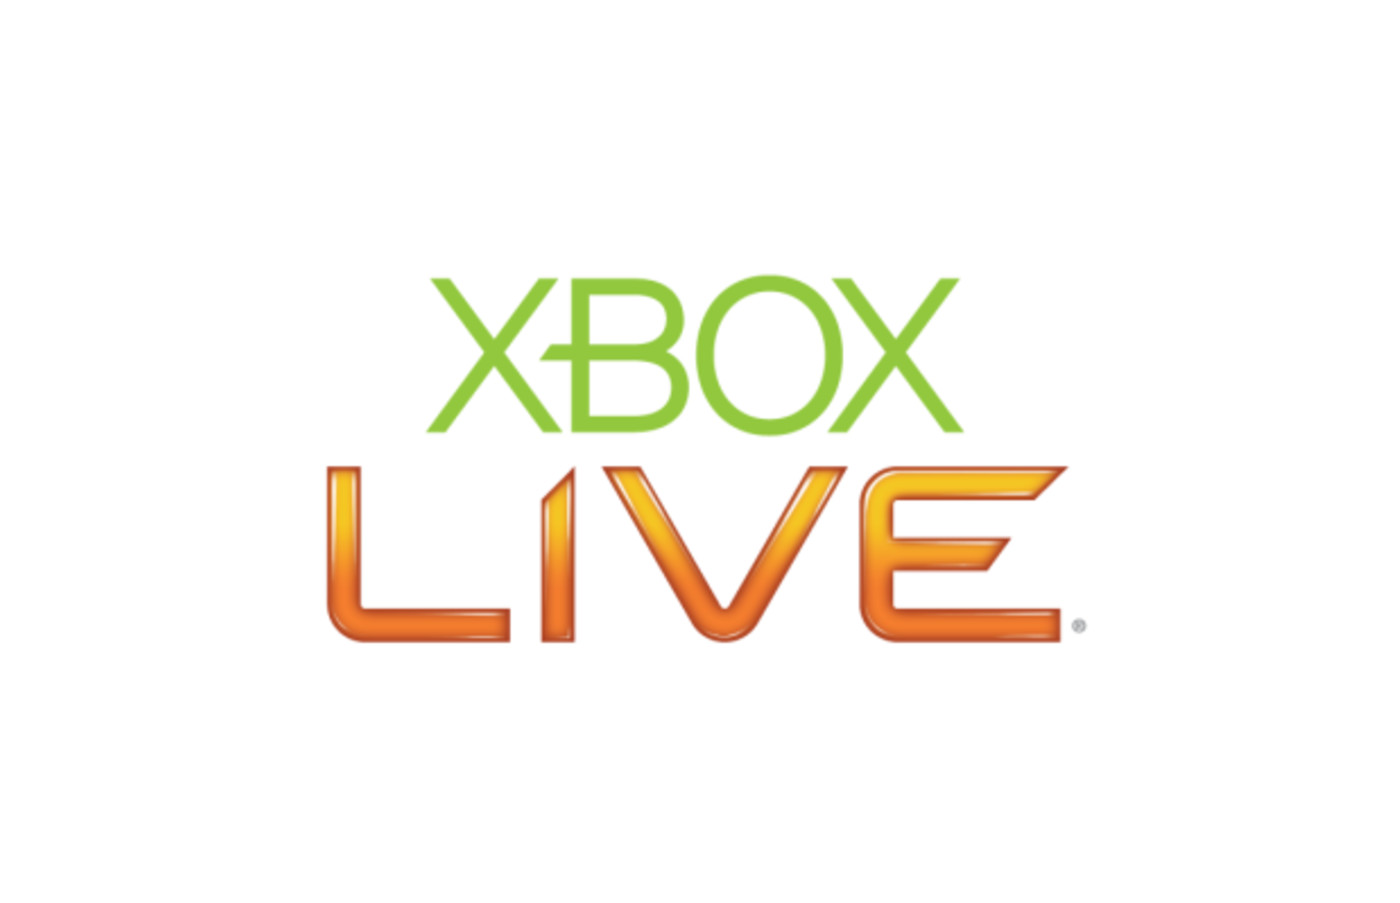 The Best Xbox Live Subscription Option for Your Gaming Needs